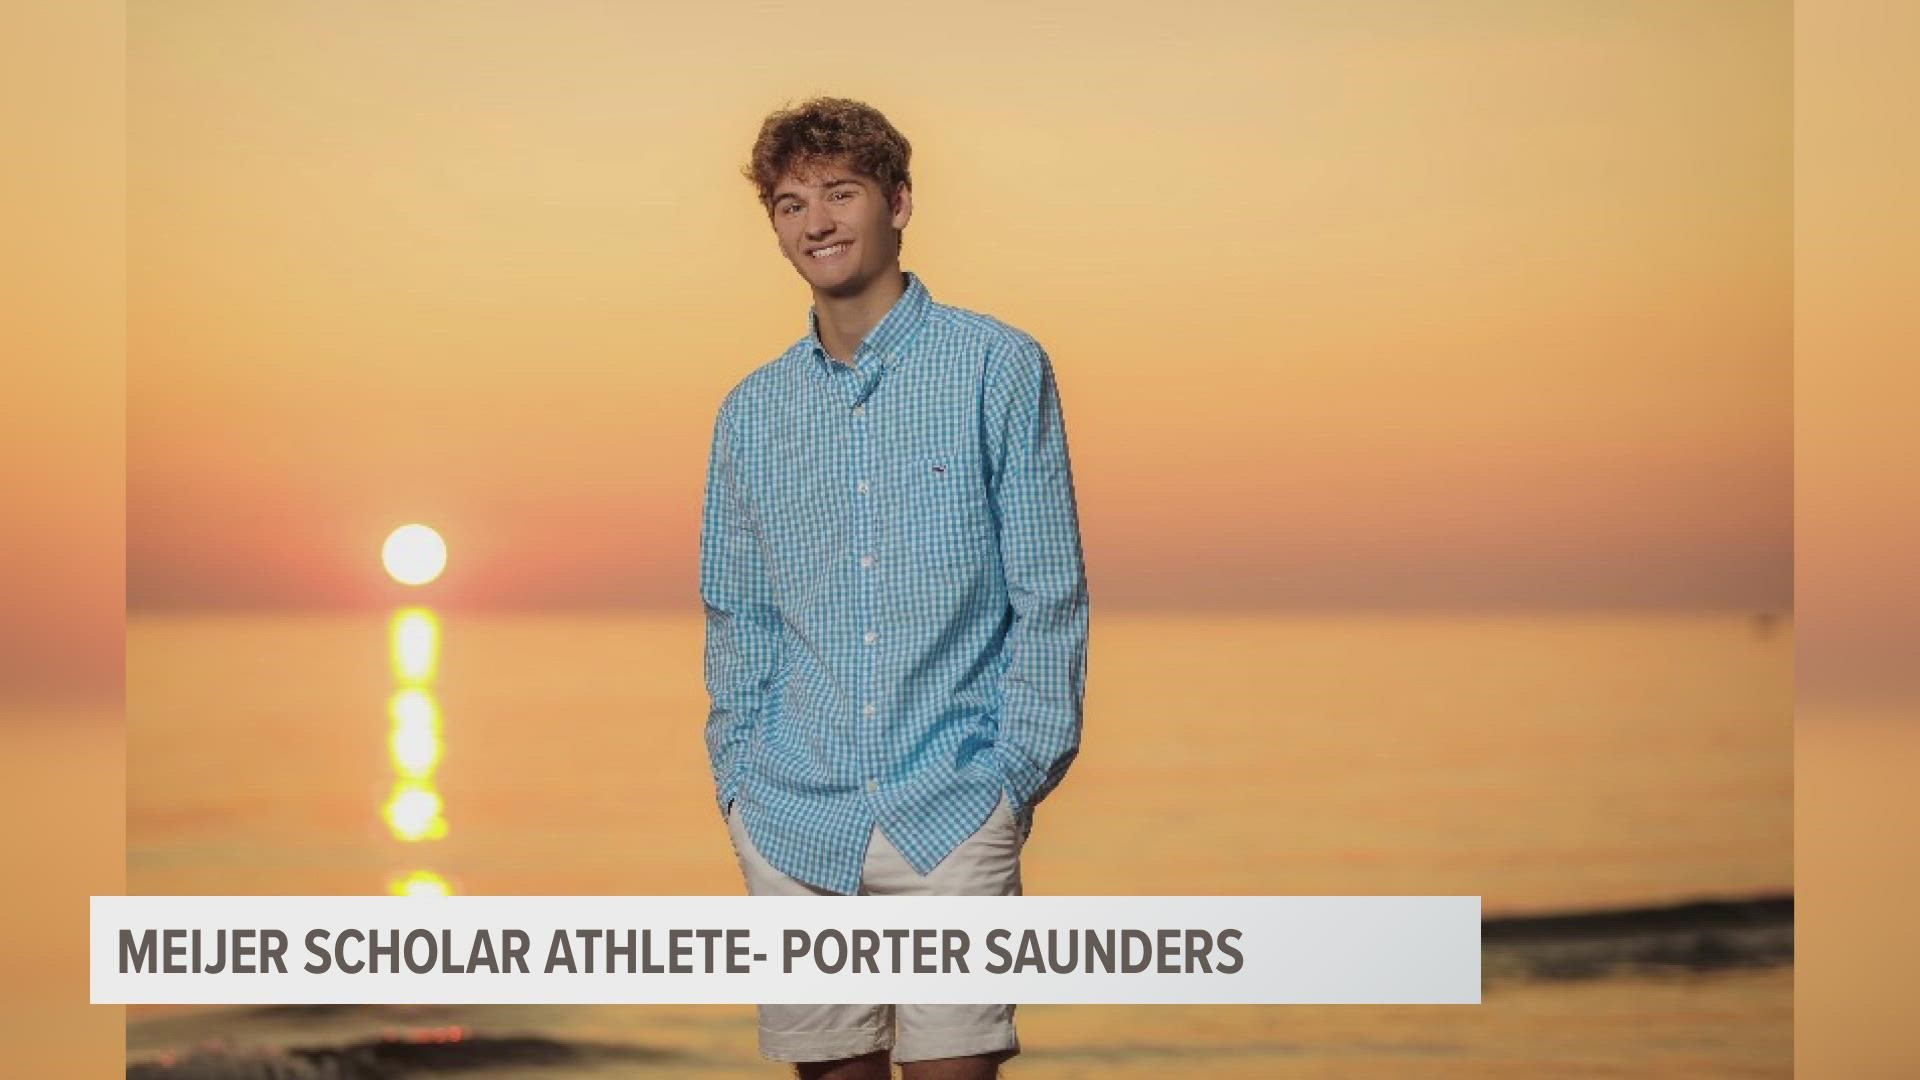 After playing four sports at Spring Lake, Saunders is excited to study business at Michigan State.